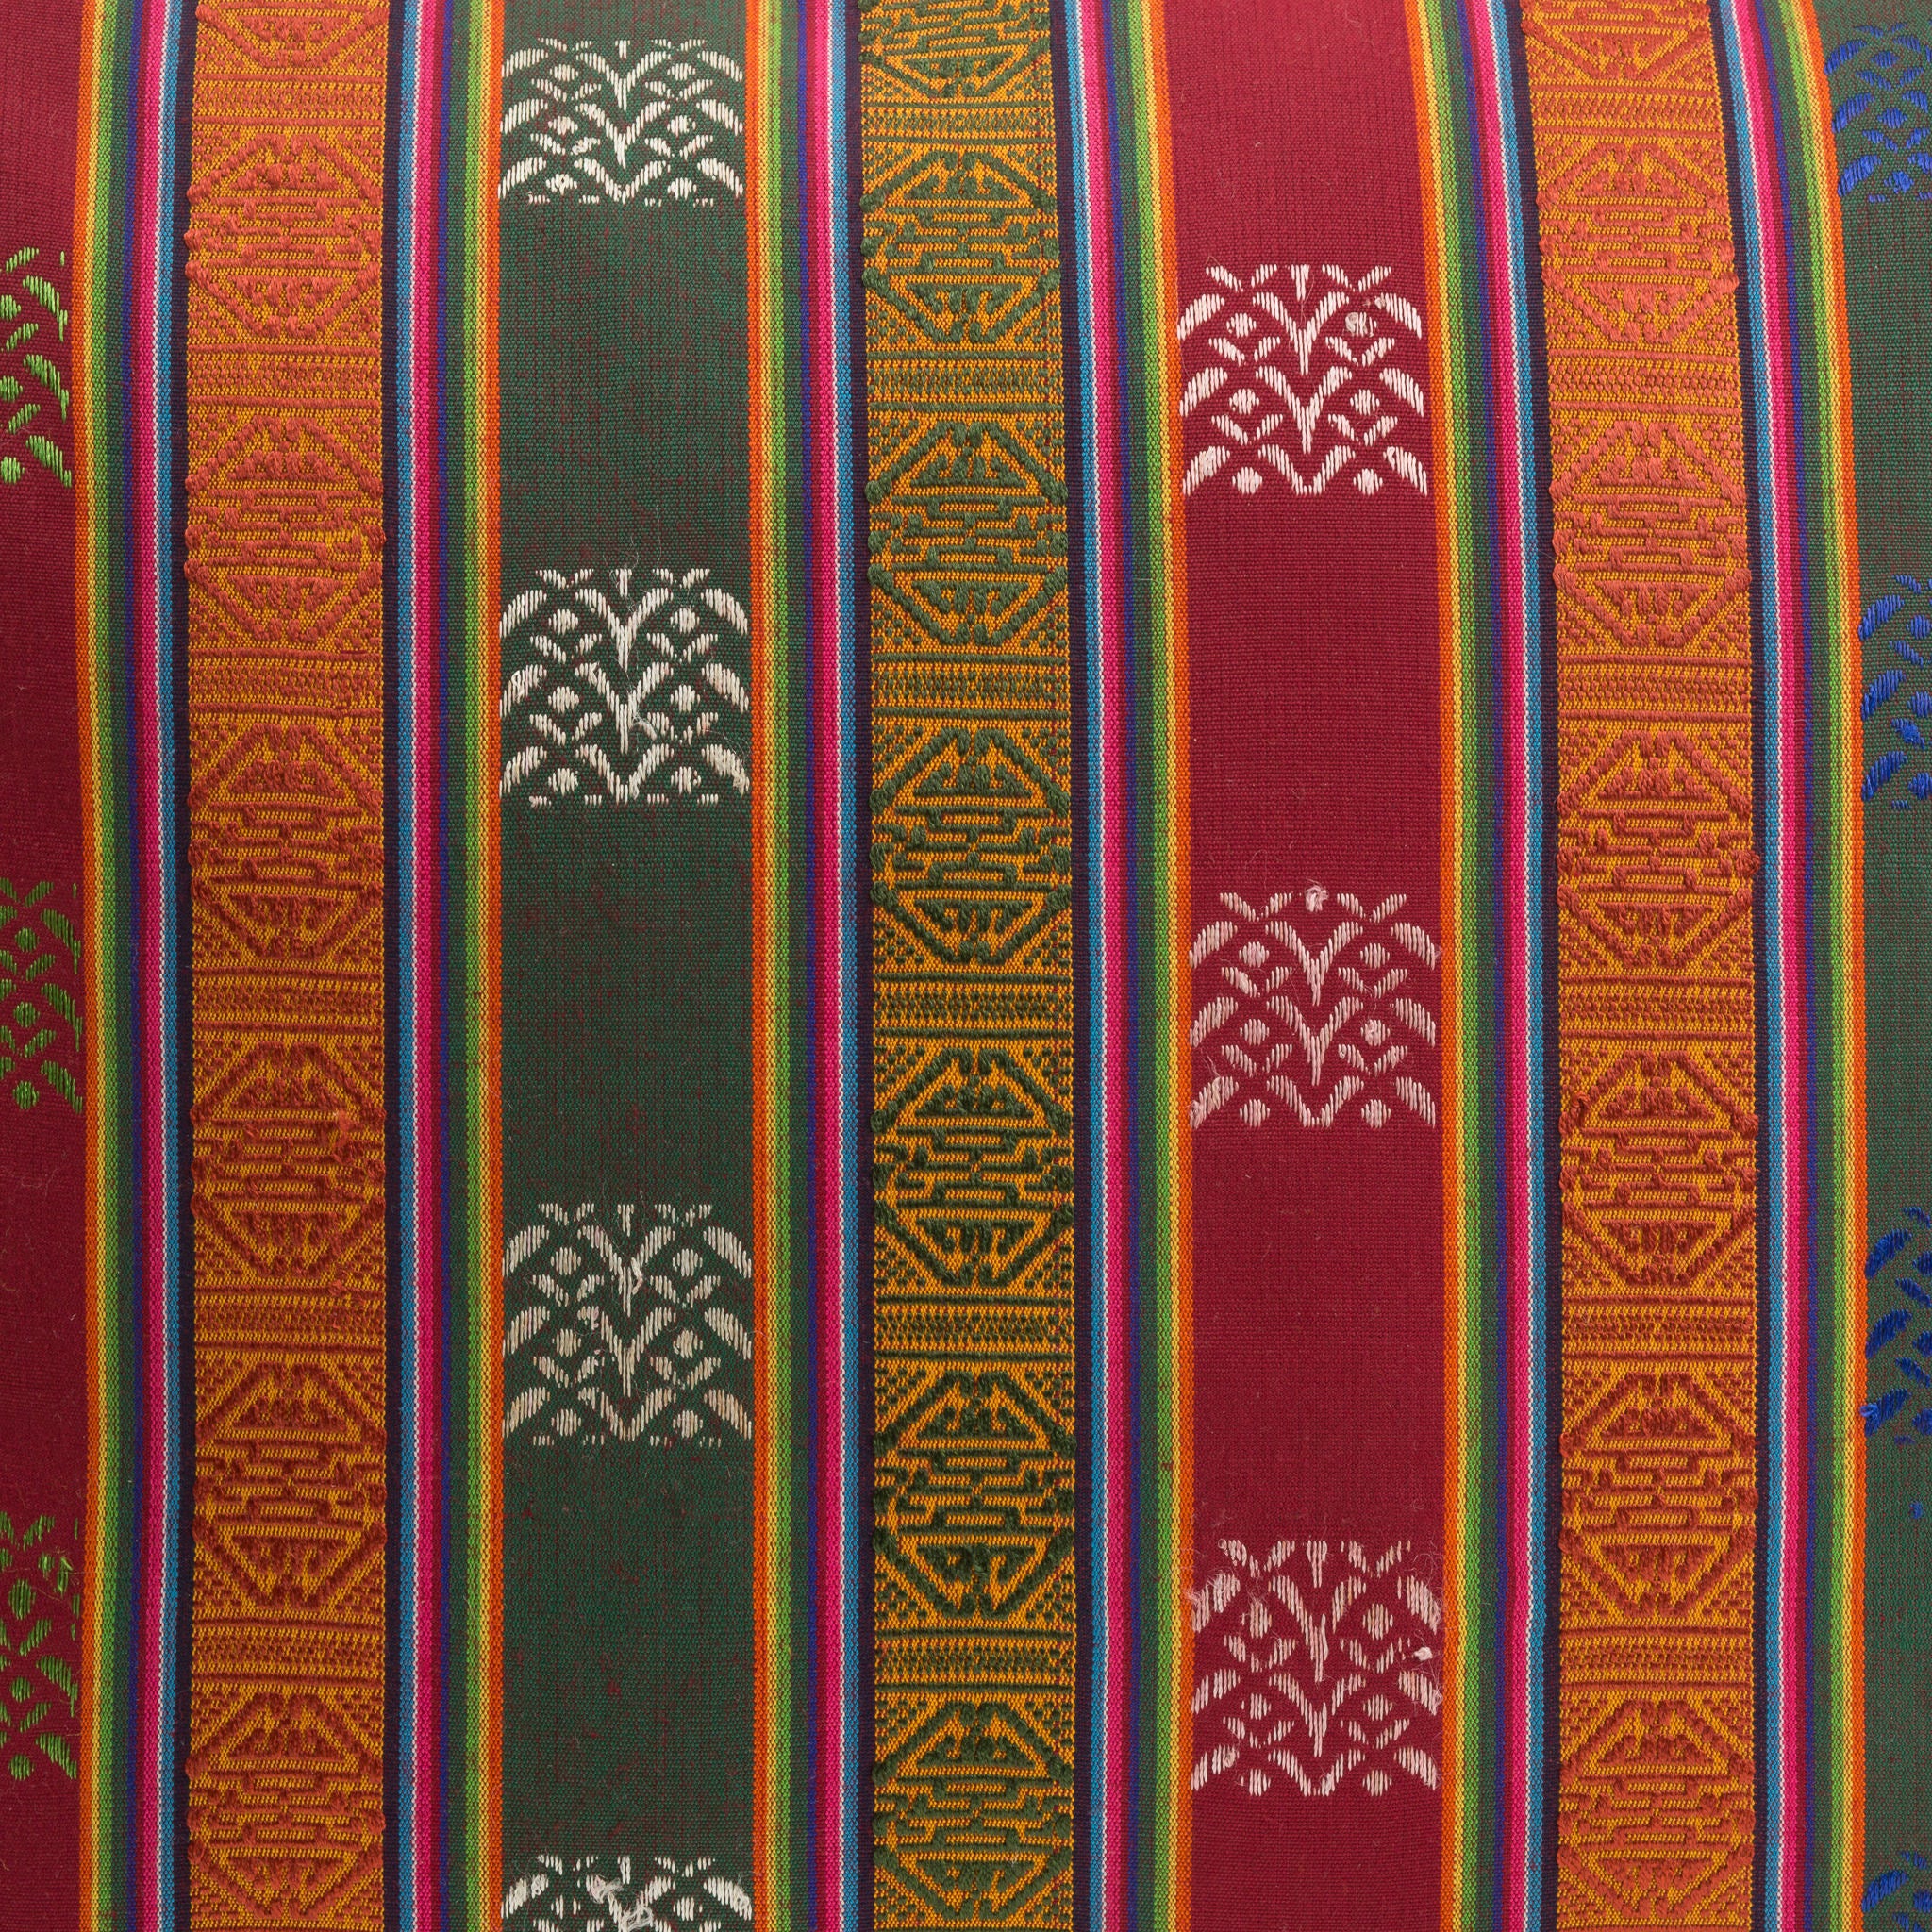 Burgundy Red, Green and Orange Striped Handwoven Scatter Square Cushion from Bhutan - DETAIL